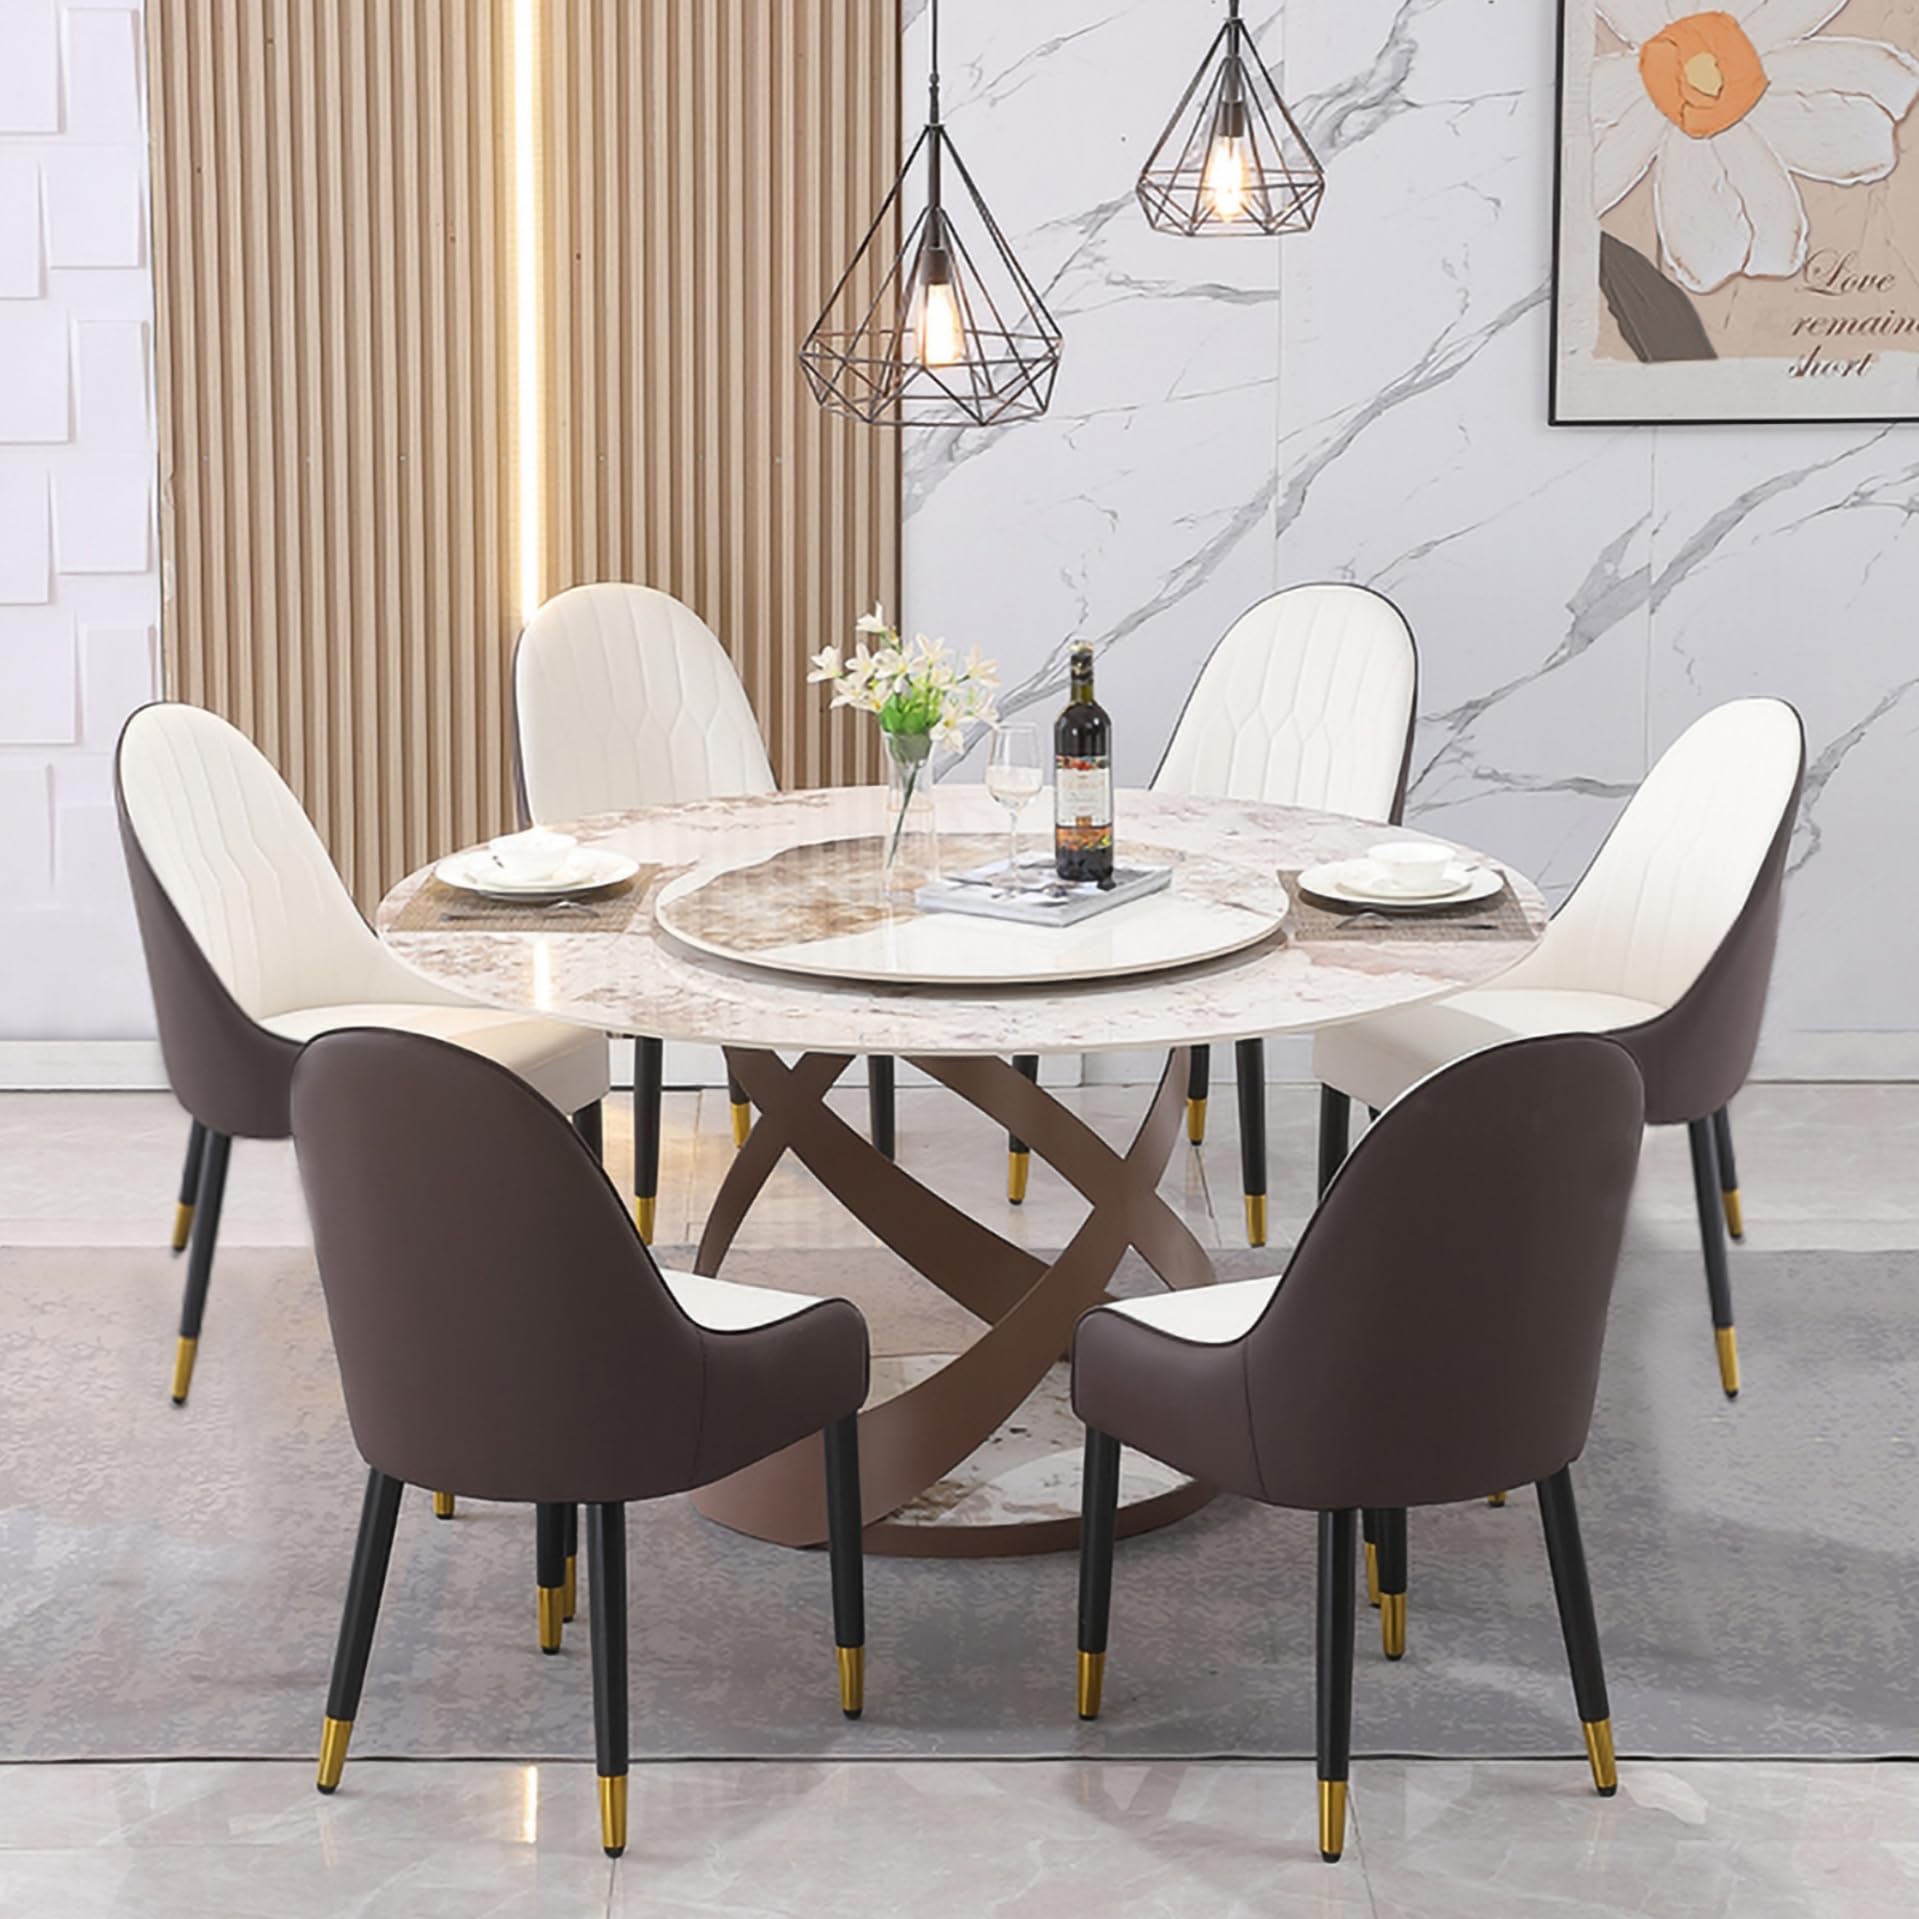 Montary 59" Pandora Sintered Stone Round Dining Table with Turntable with 6 Dining Chairs